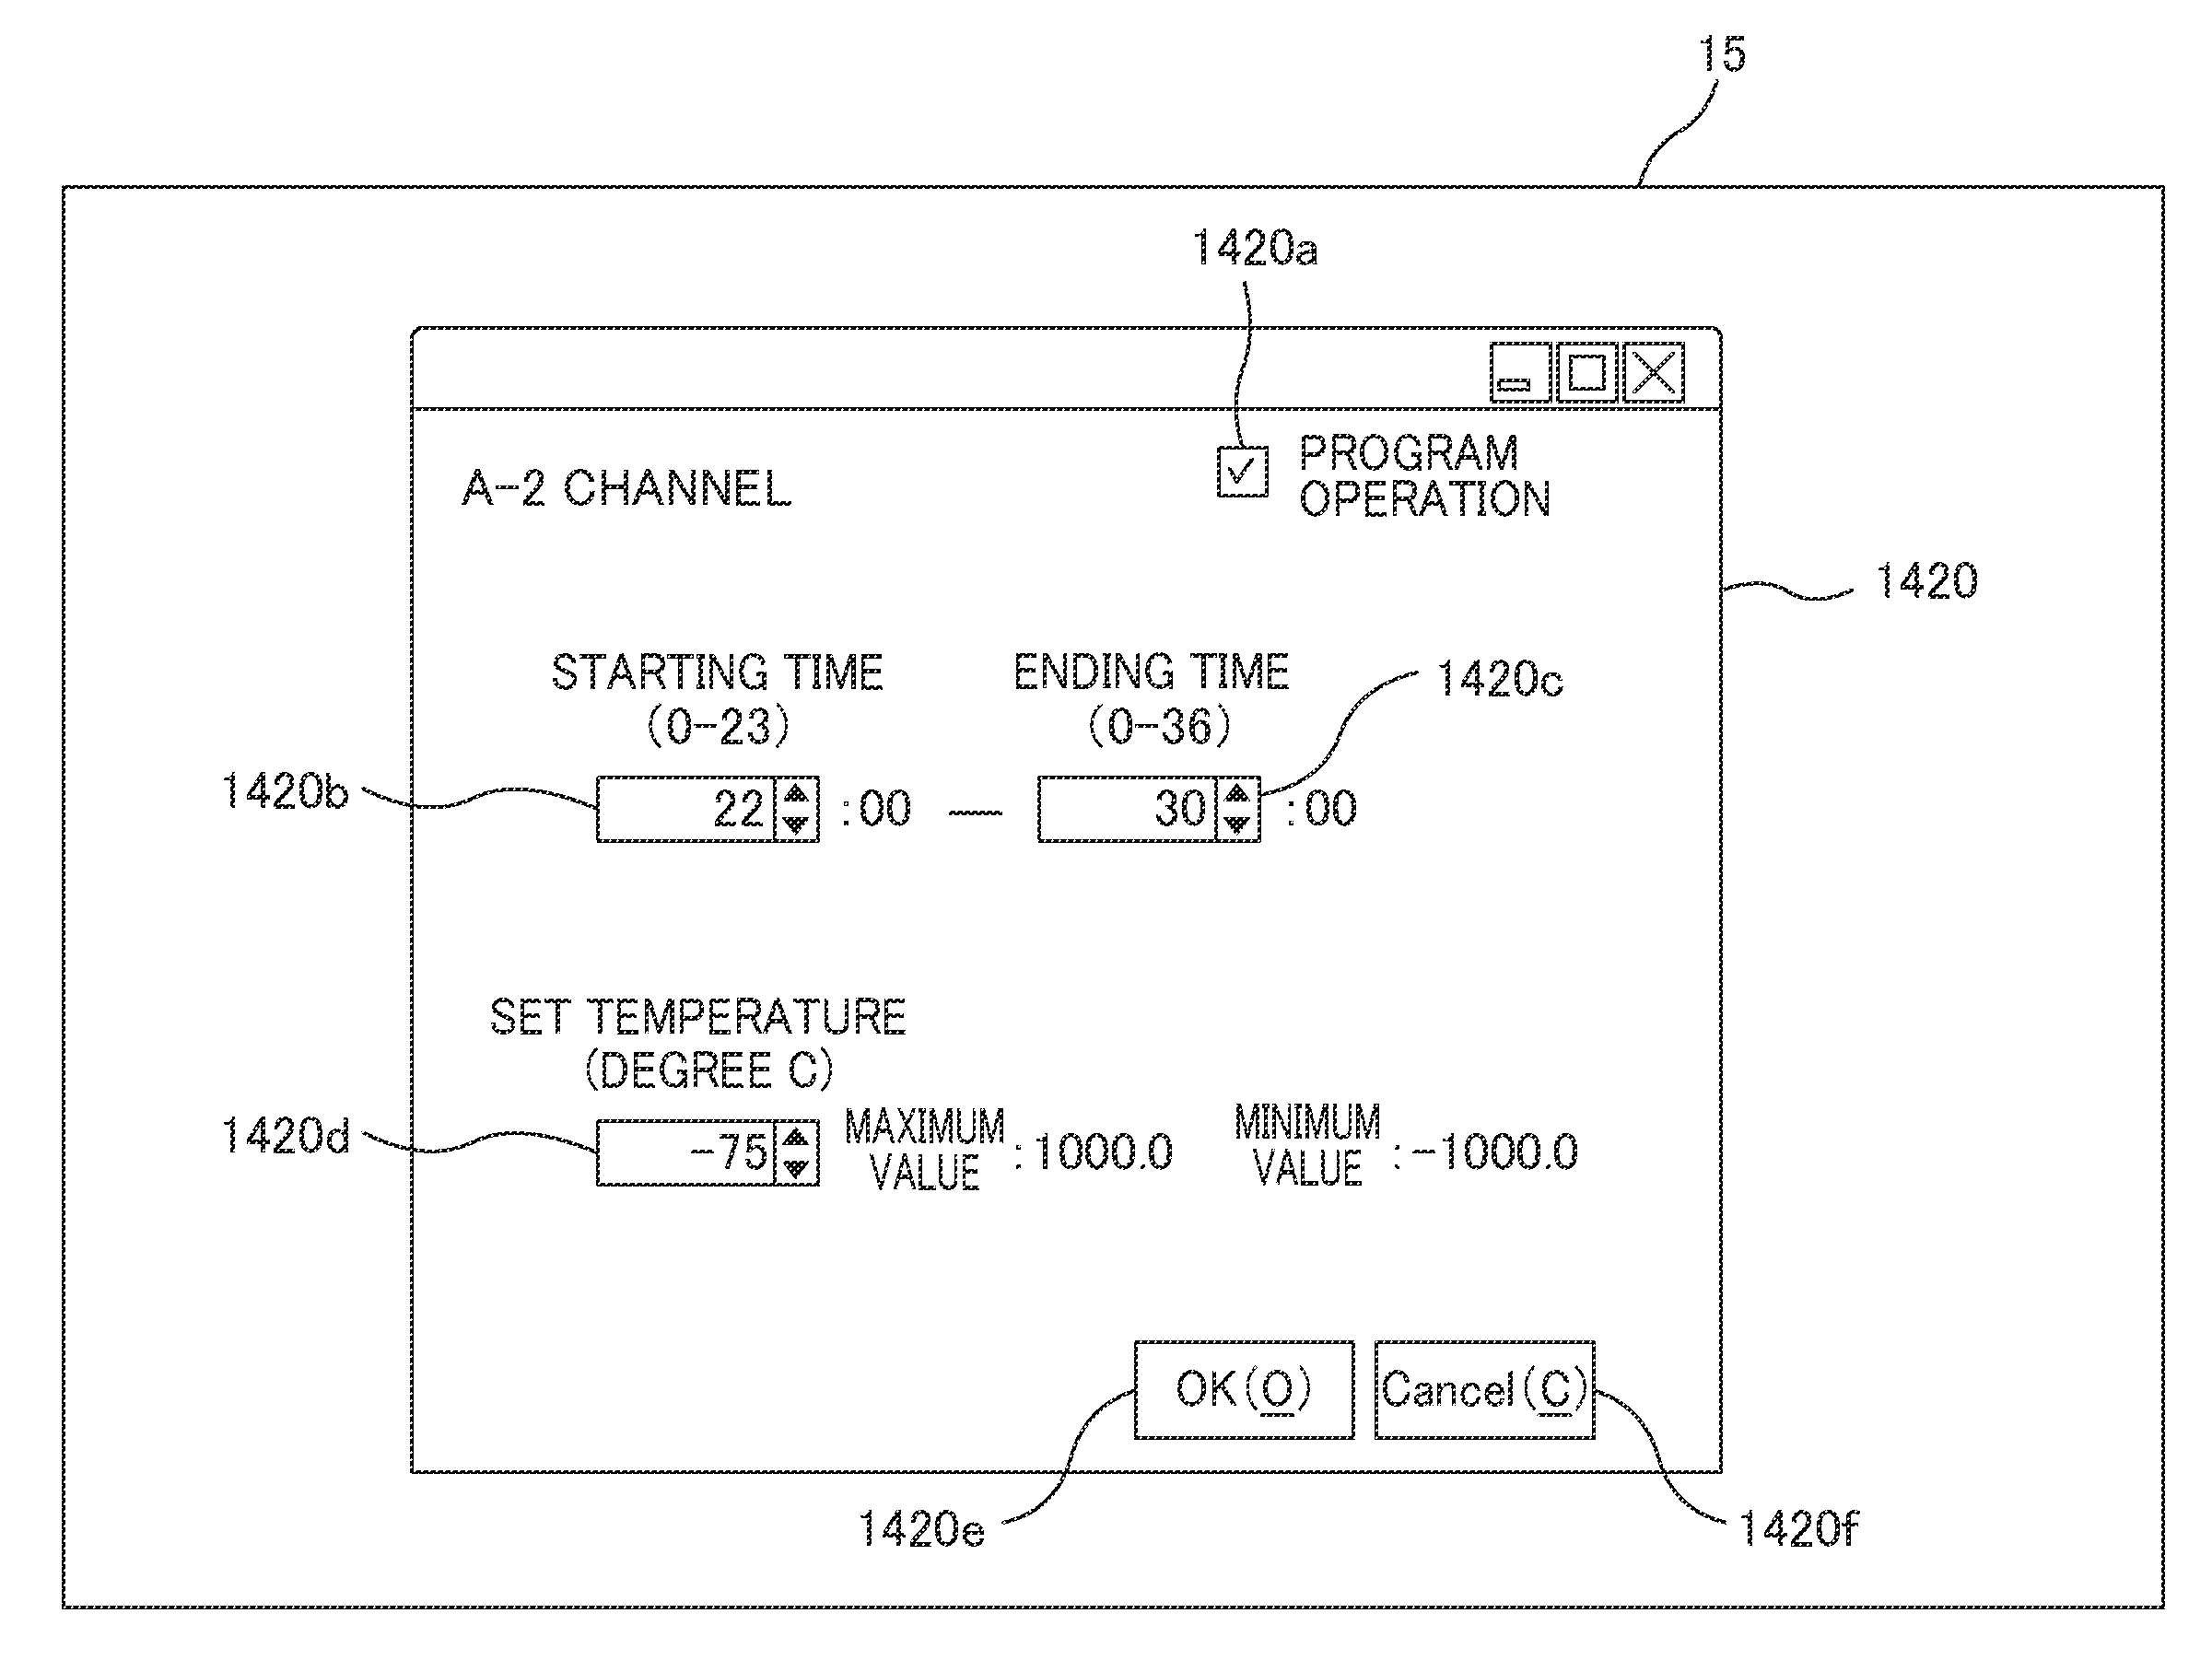 Centralized monitoring apparatus